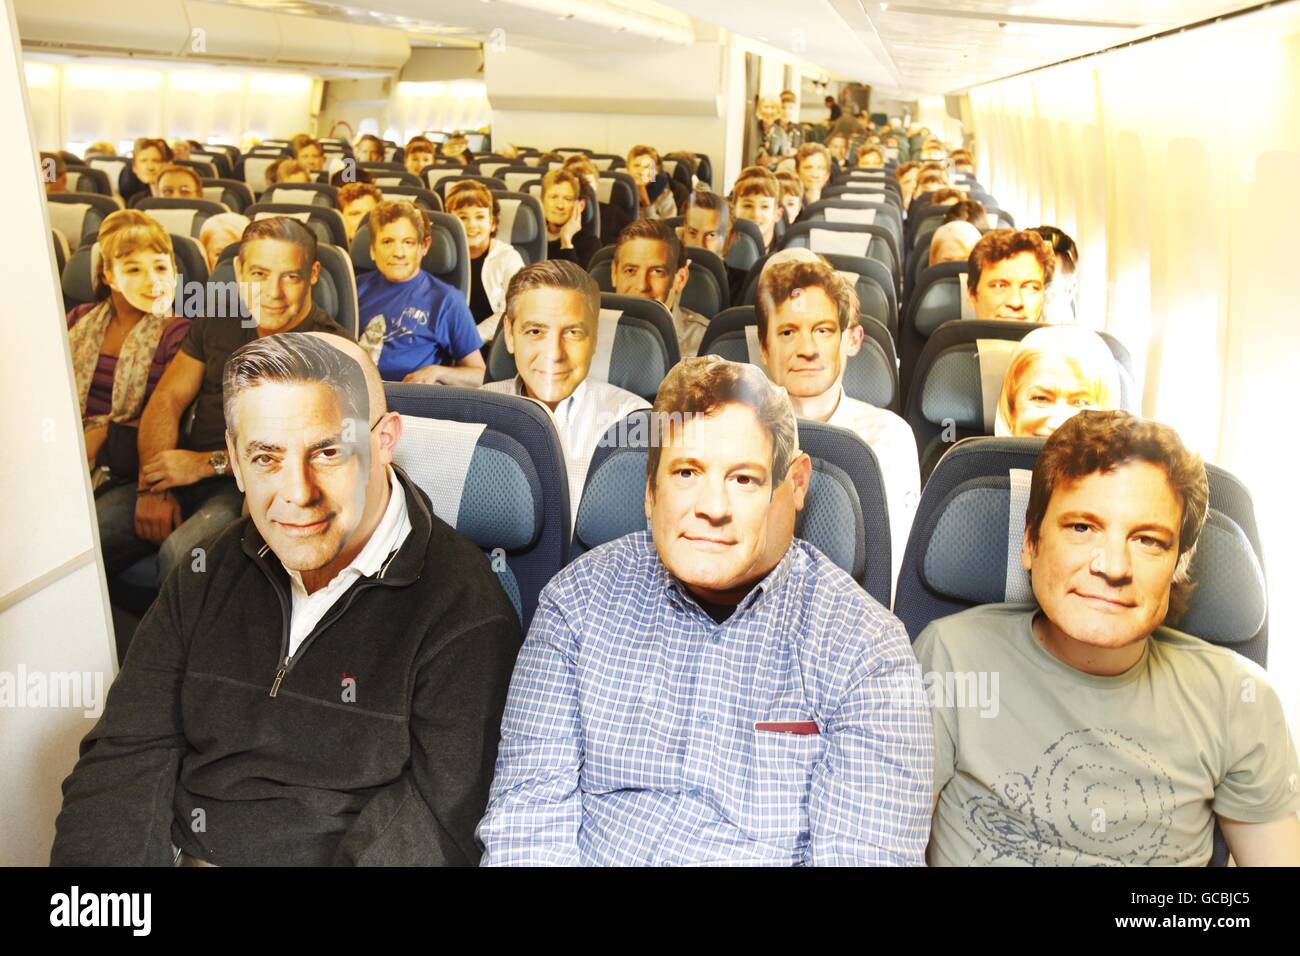 Air New Zealand passengers on NZ1 from London Heathrow to Los Angeles wear masks of Oscar nominees Colin Firth, George Clooney, Helen Mirren and Carey Mulligan. Stock Photo